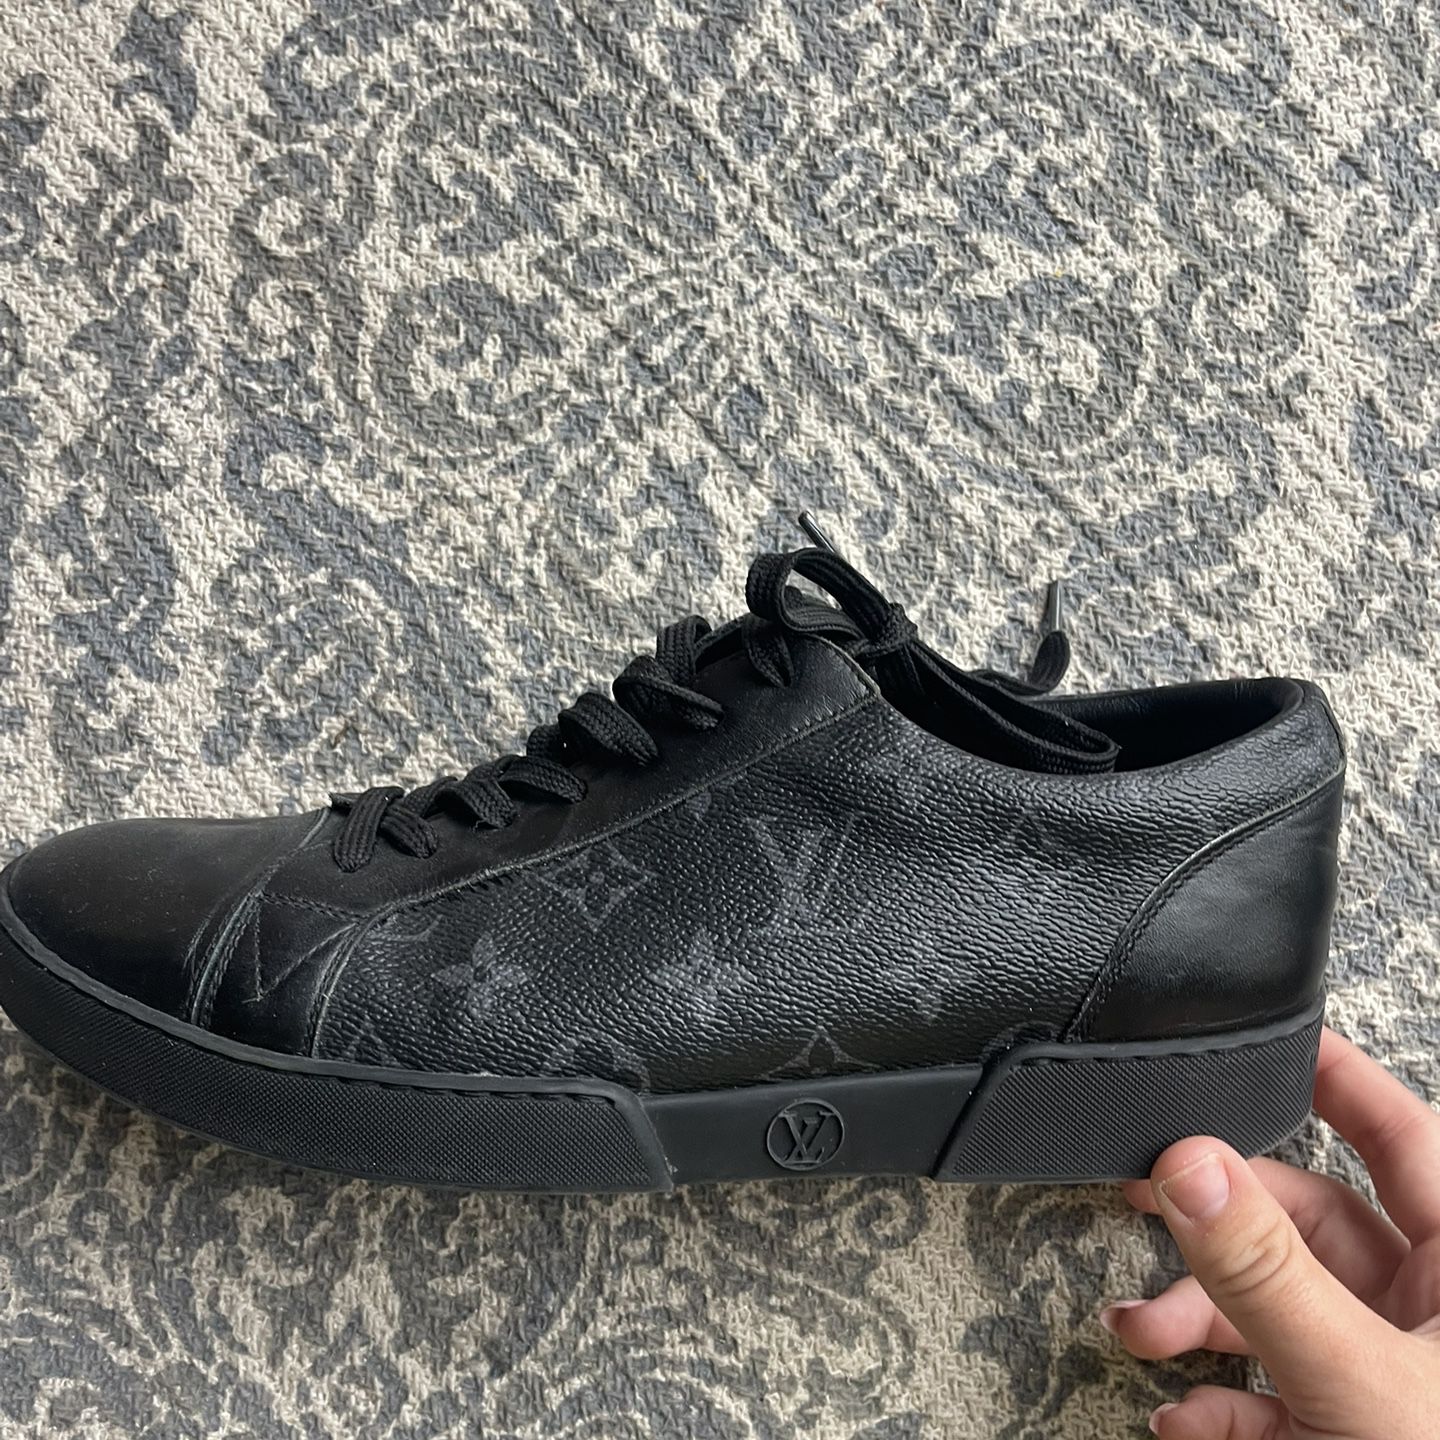 Louis Vuitton Size 45 Shoes Track Runners for Sale in Hollywood, FL -  OfferUp